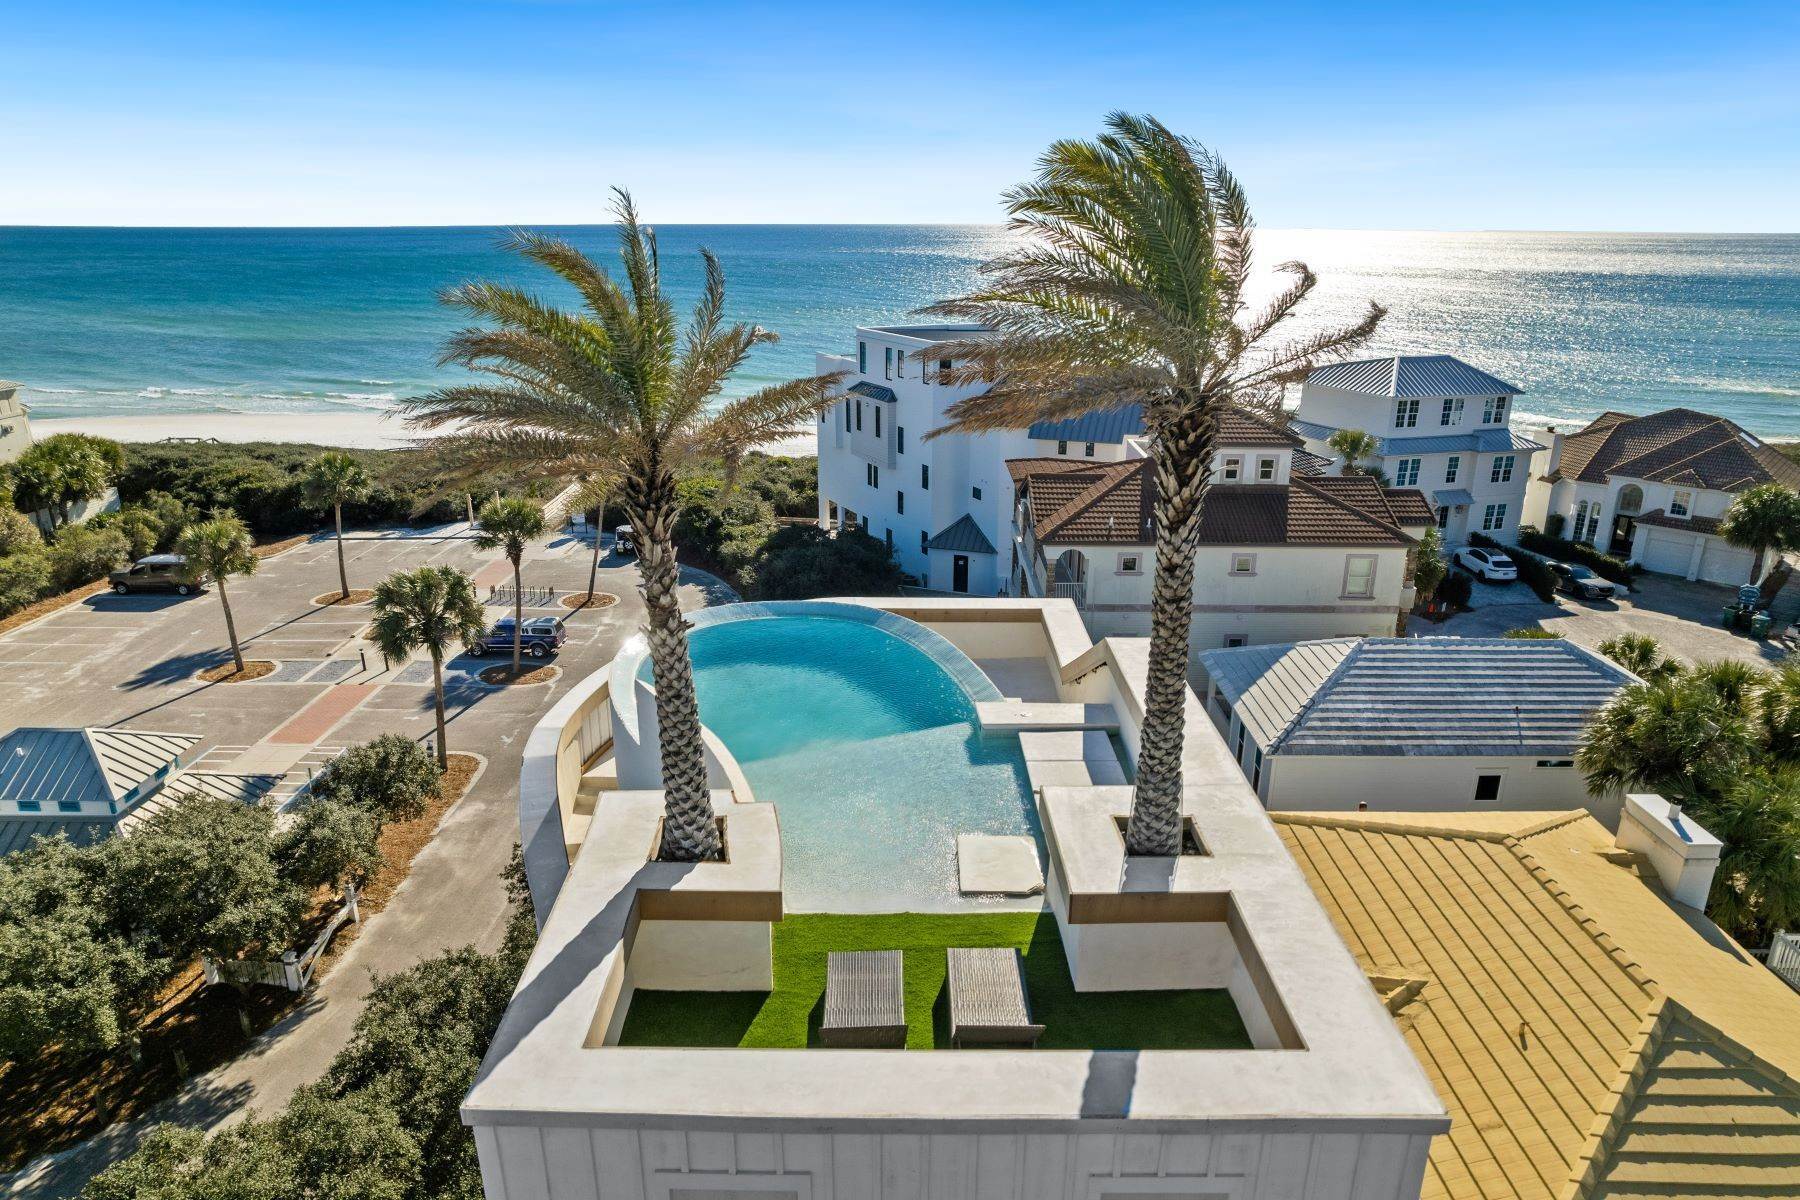 Single Family Homes for Sale at Remarkable Beachside Retreat With Rooftop Pool 3434 East County Highway 30A Santa Rosa Beach, Florida 32459 United States